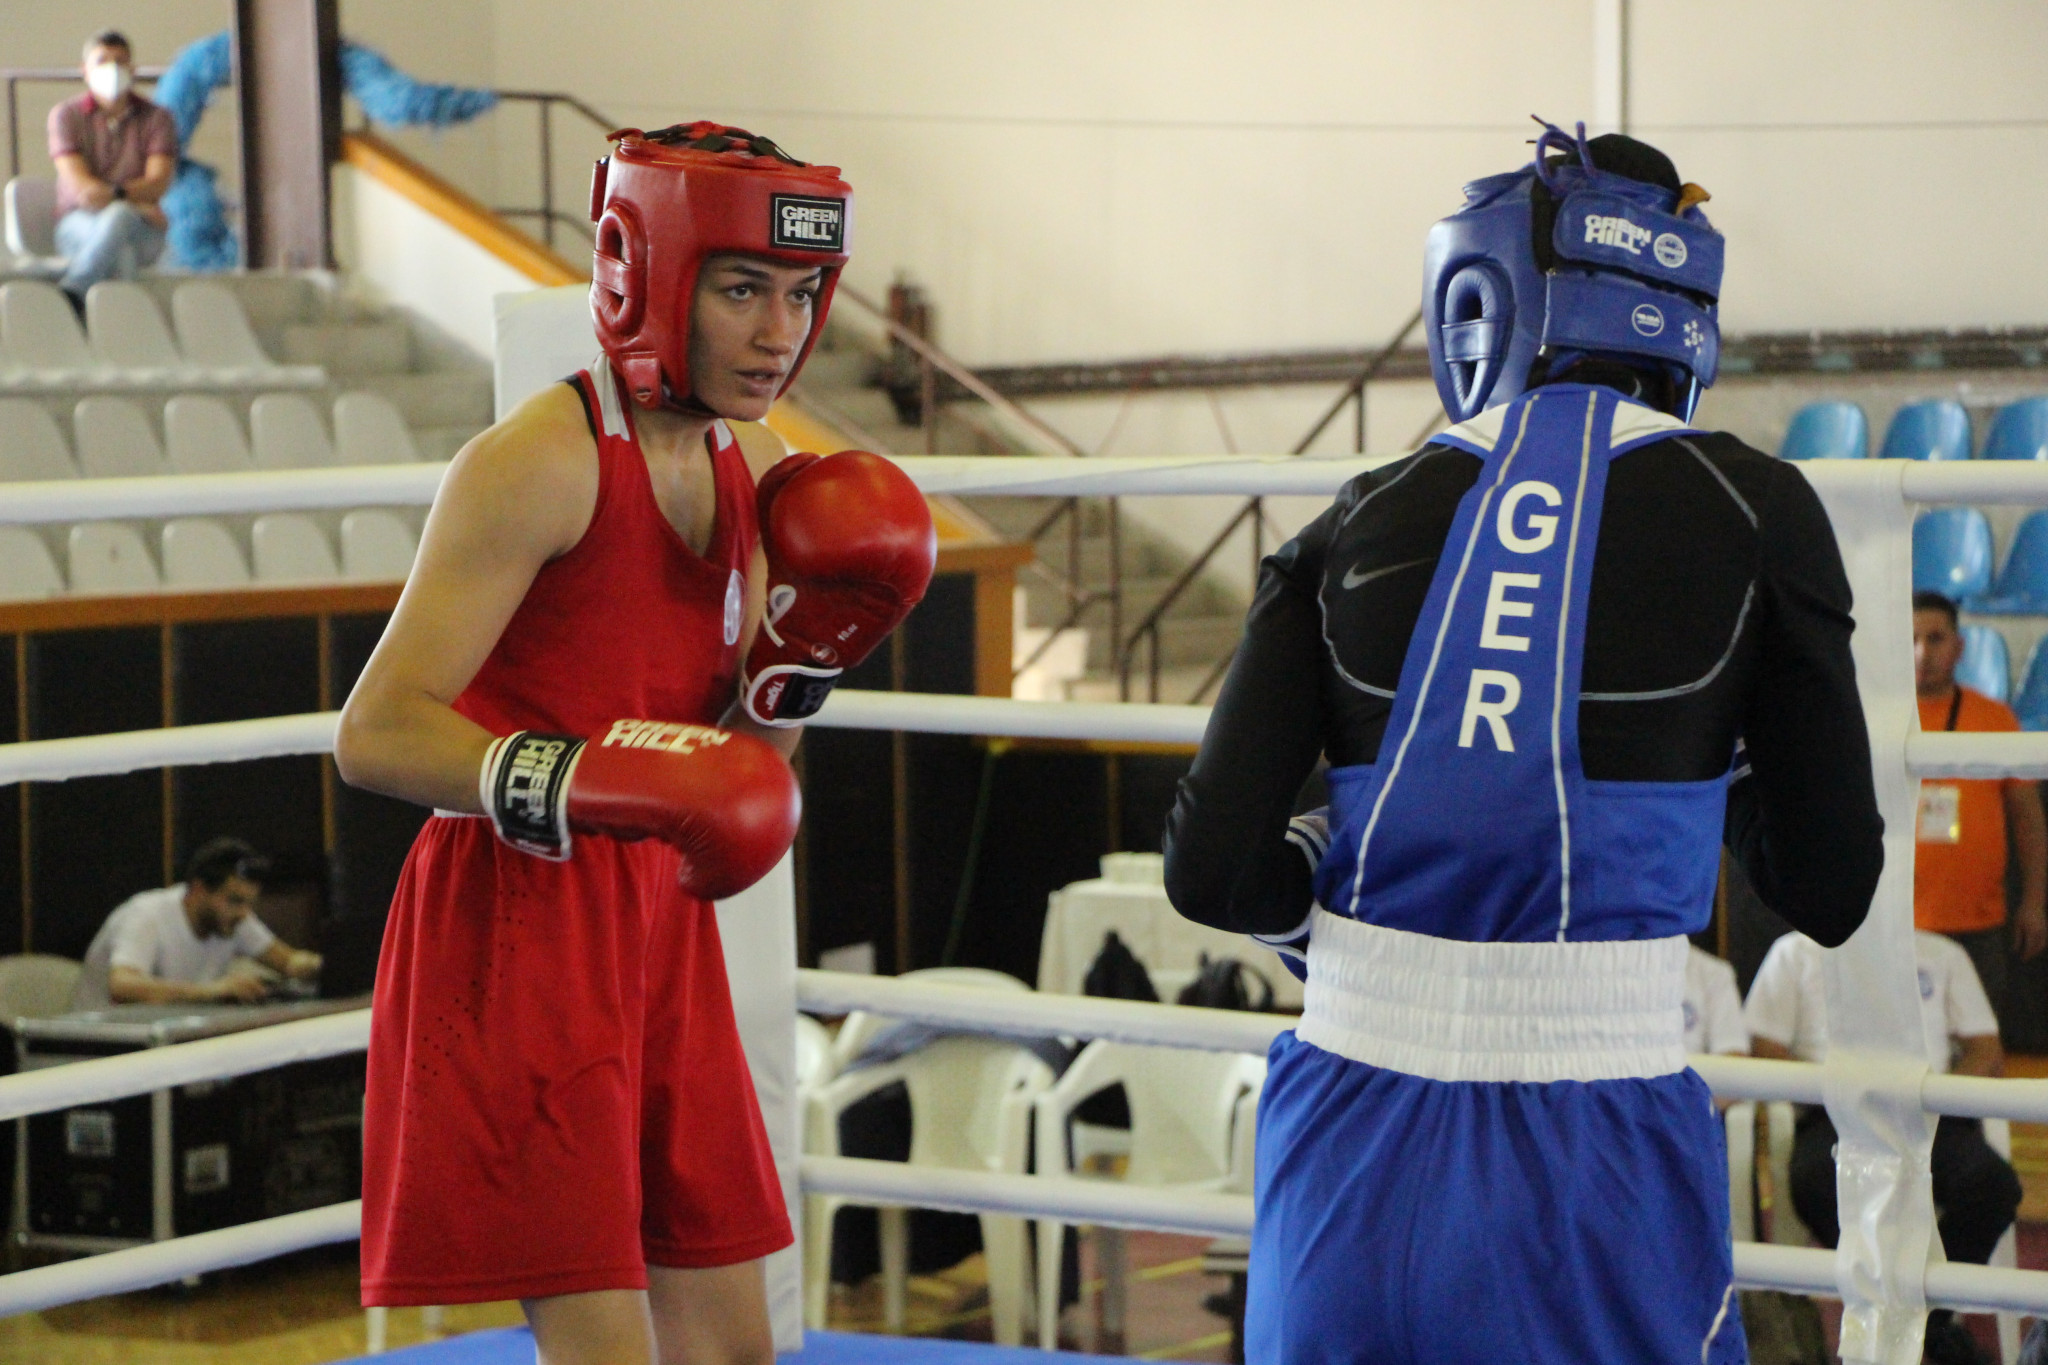 World champion Hatice Akbaş of Turkey, left, claimed another gold with victory today in boxing ©FISU